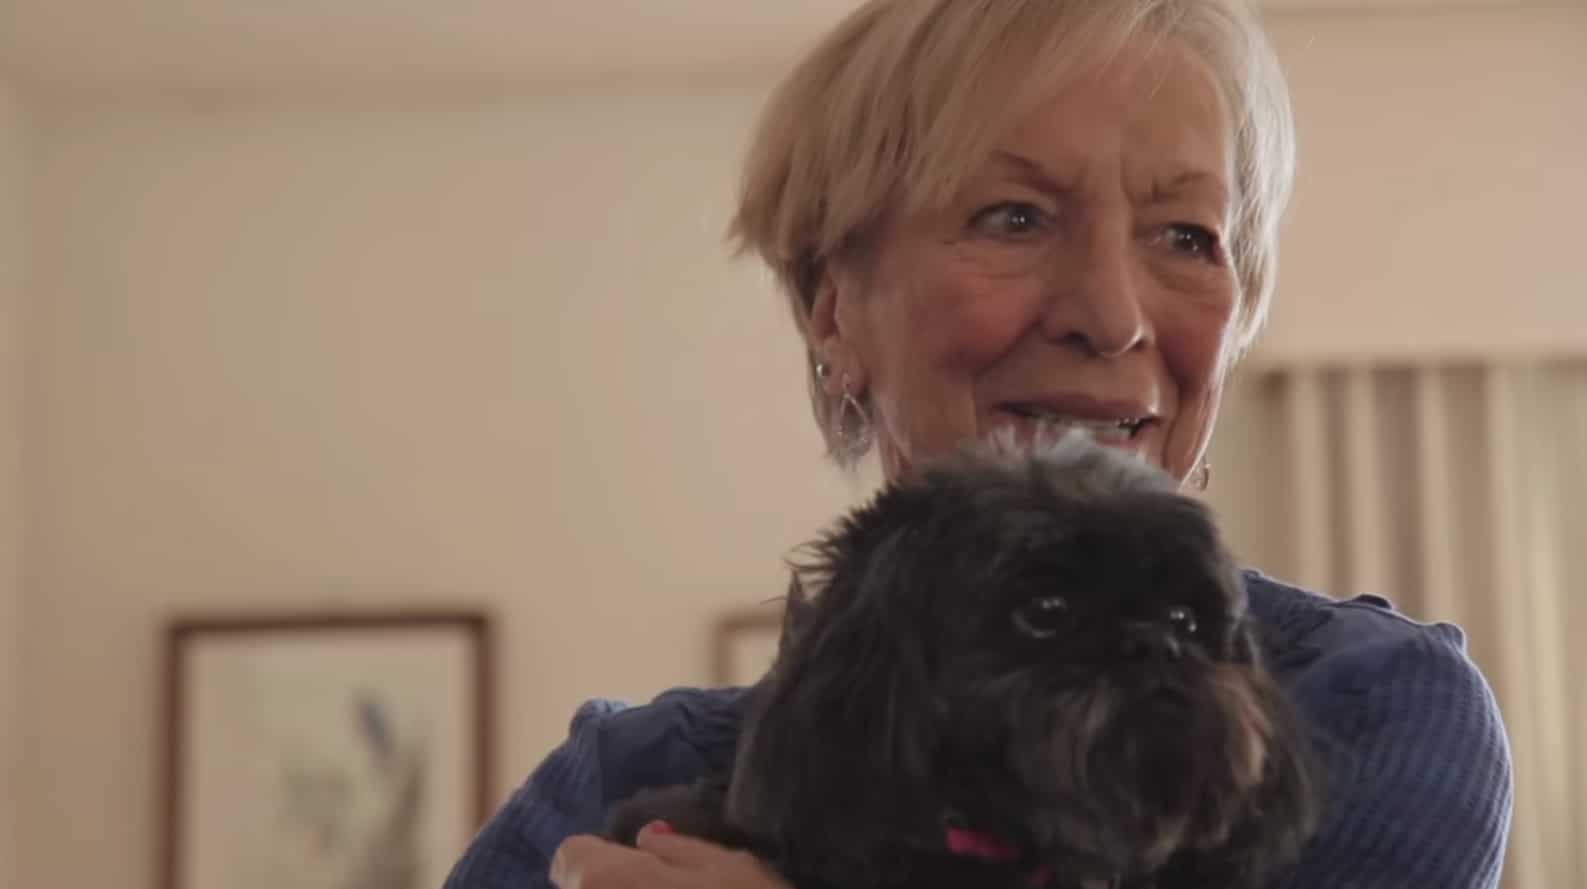 Screengrab of Nina Bamford with her dog from "Living with Valve Disease" video.